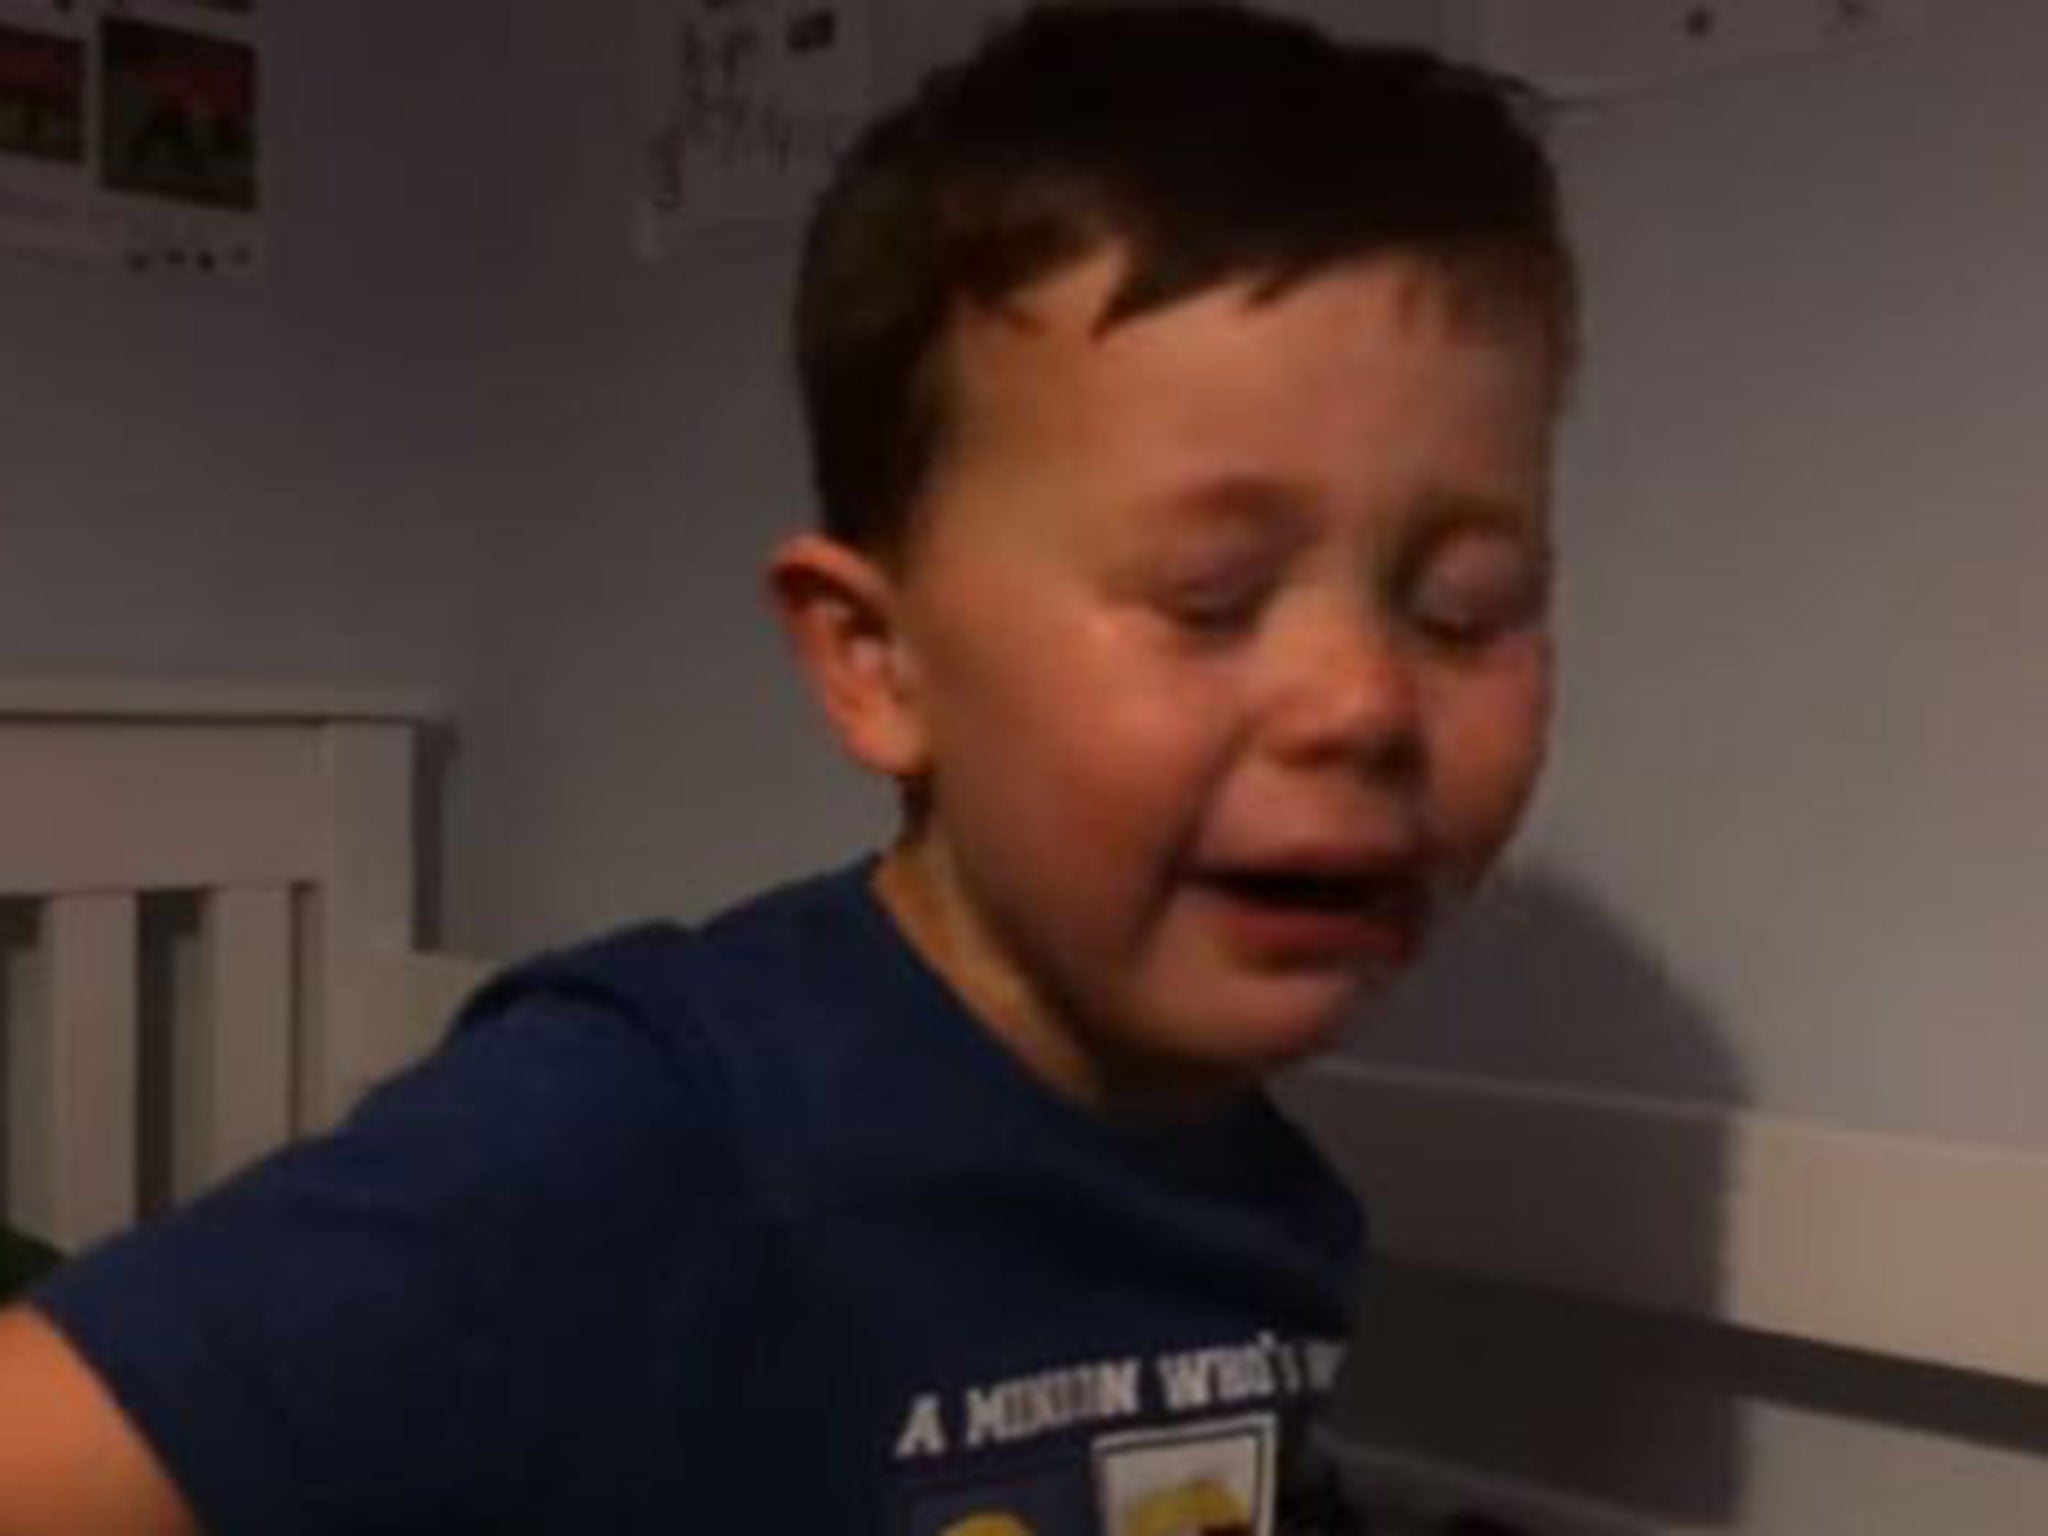 Four-year-old Louis Diamond reacts to Robin van Persie leaving Manchester United